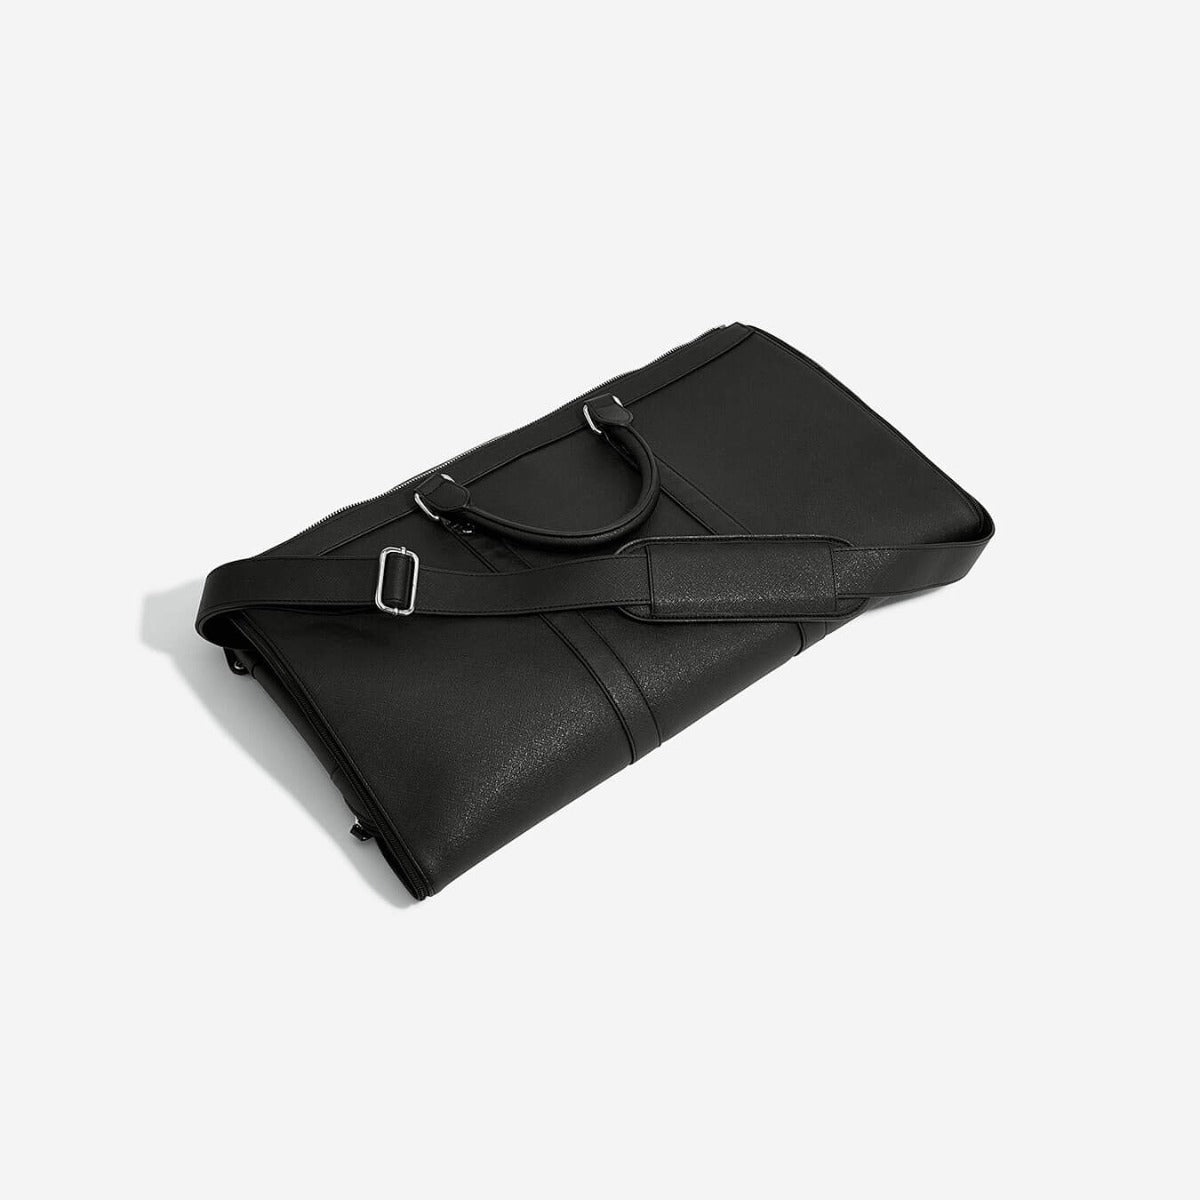 Stackers Weekend Garment Bag - Black - Holiday Accent Ltd